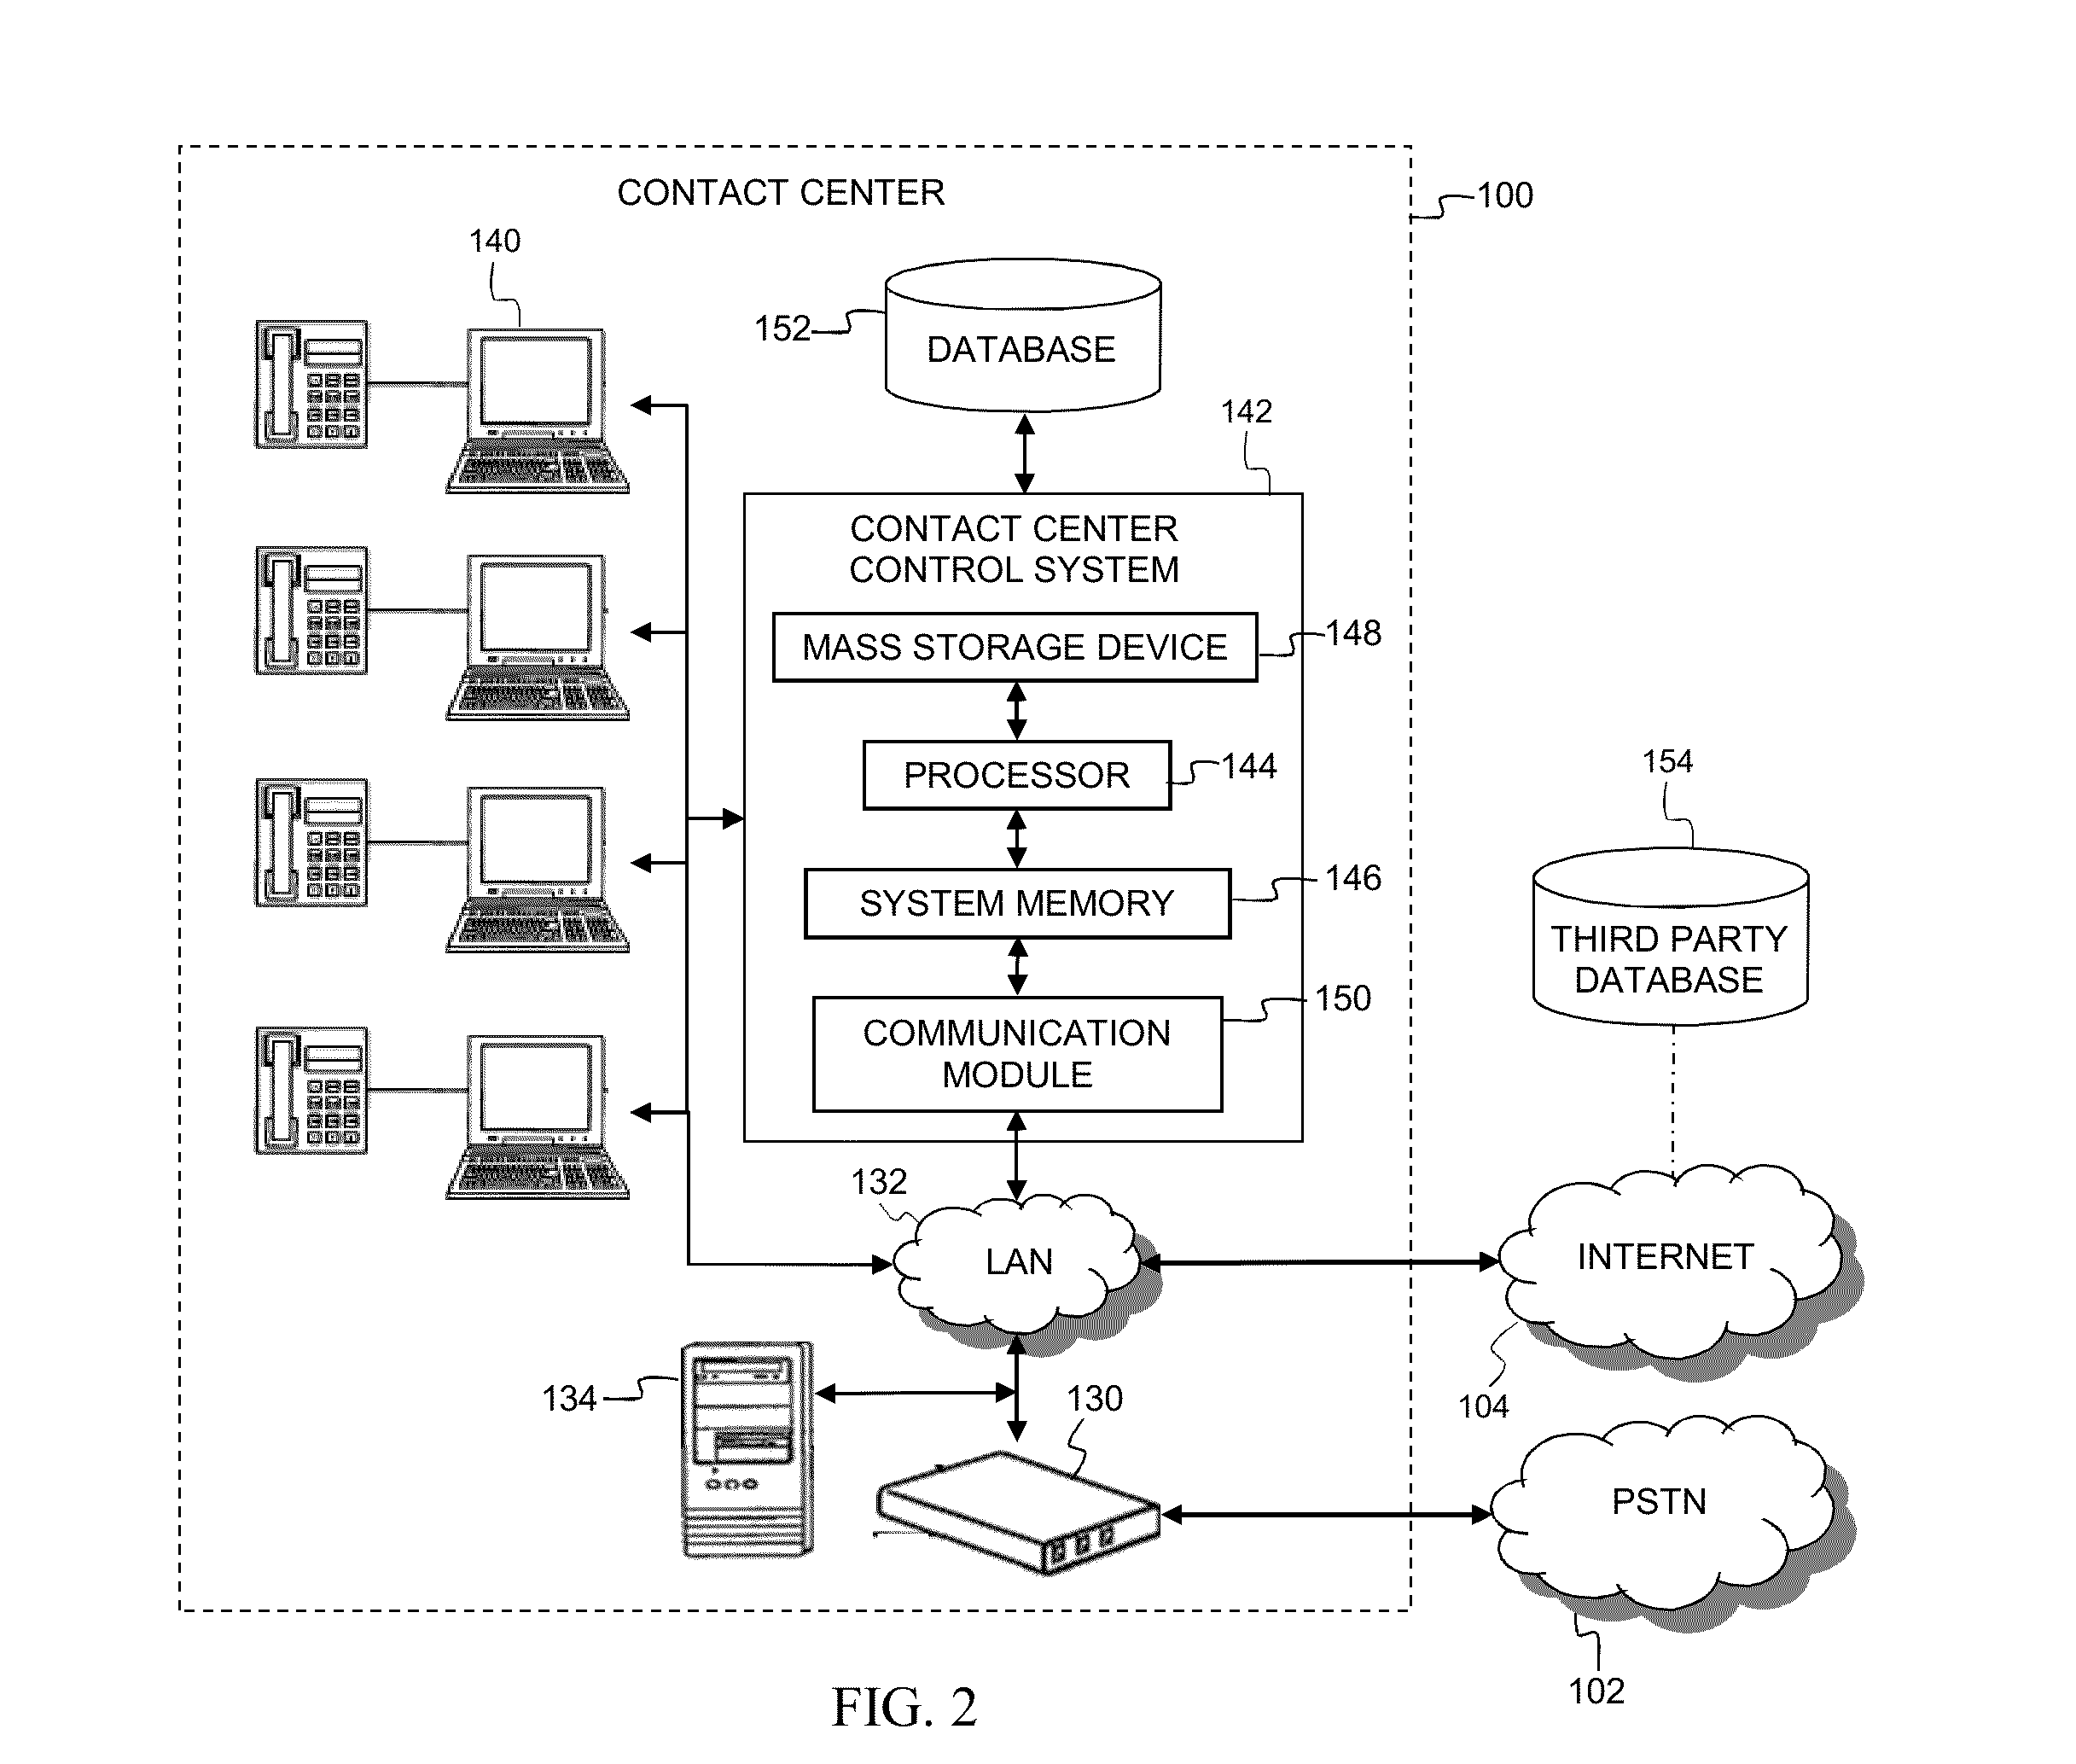 Methods and apparatus for identifying fraudulent callers